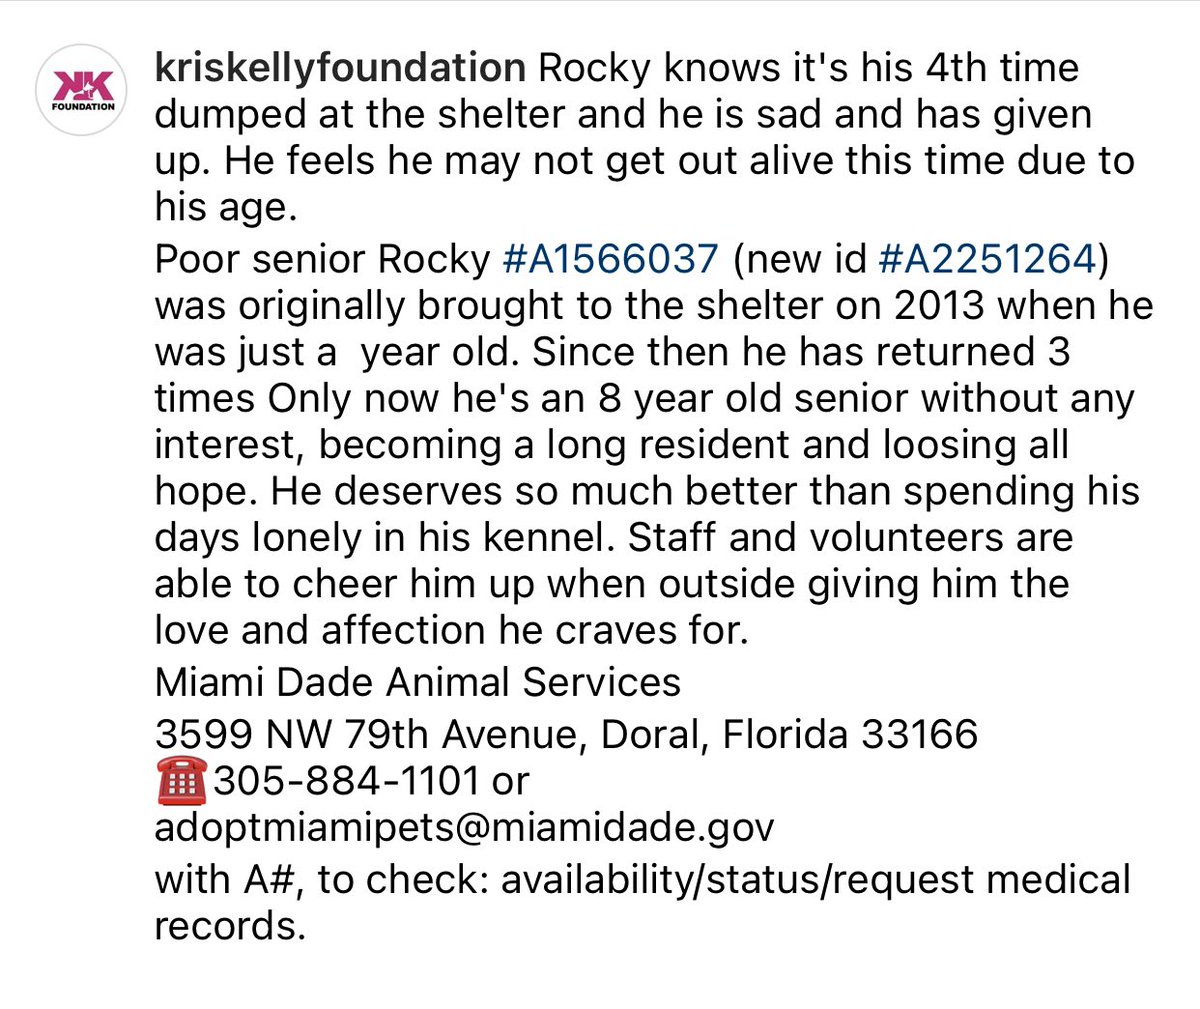 🆘TRANSPORT NEEDED🆘
🆘EUTH LIST🆘

Rocky #A2251264 #MDAS #Miami dumped 4 times,knows this is his last chance! He is sad &giving up 

@kriskellyrescue has family in #NewJersey but needs #dogtransport 🙏🏼 @PilotsNPaws @PilotTroy ANY HELP GREATLY APPRECIATED🥺
#rescue #dogrescue